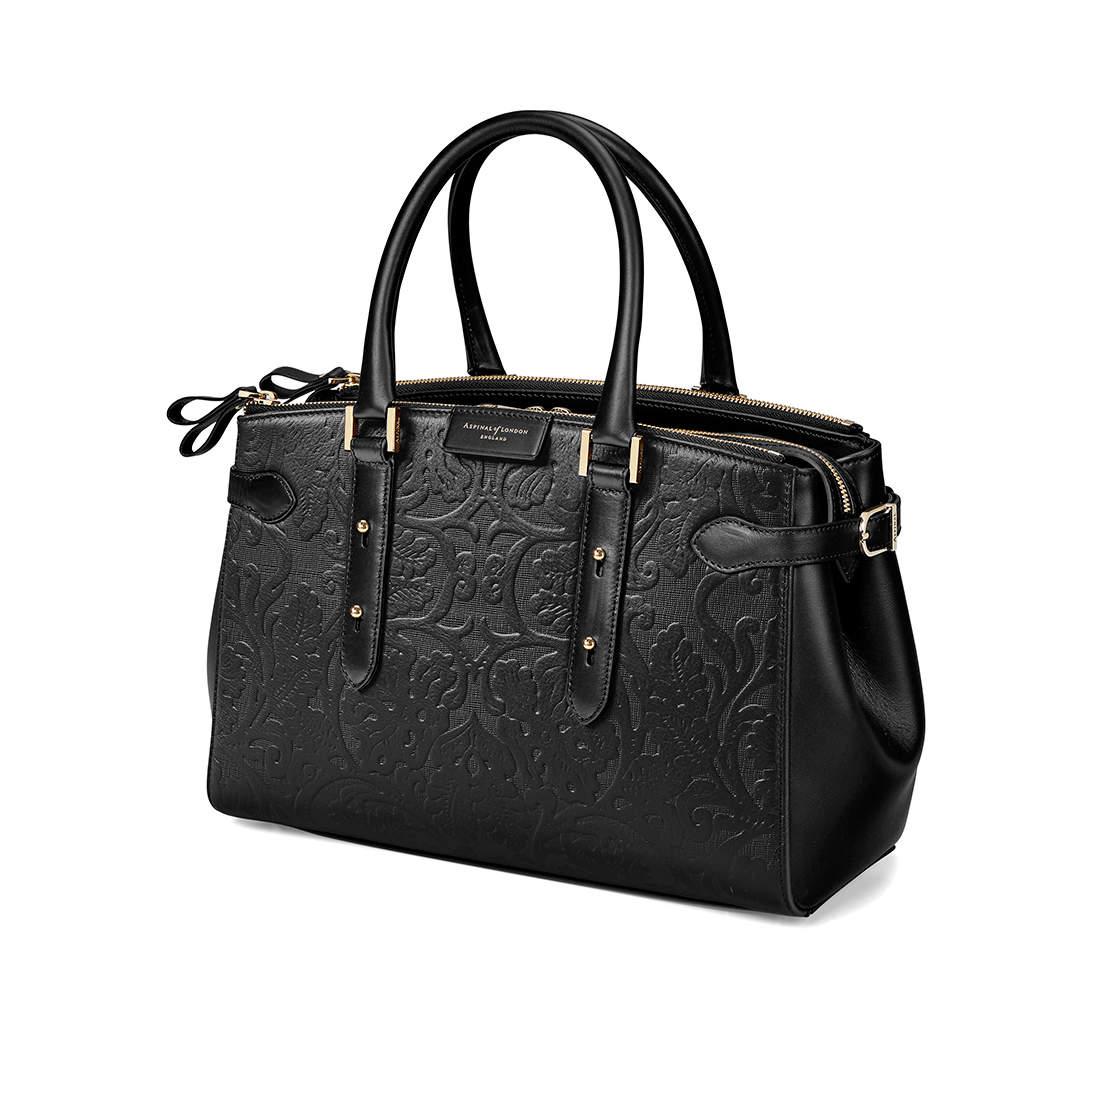 Aspinal of London Leather Women's Brook Street Tote Bag in Black - Lyst